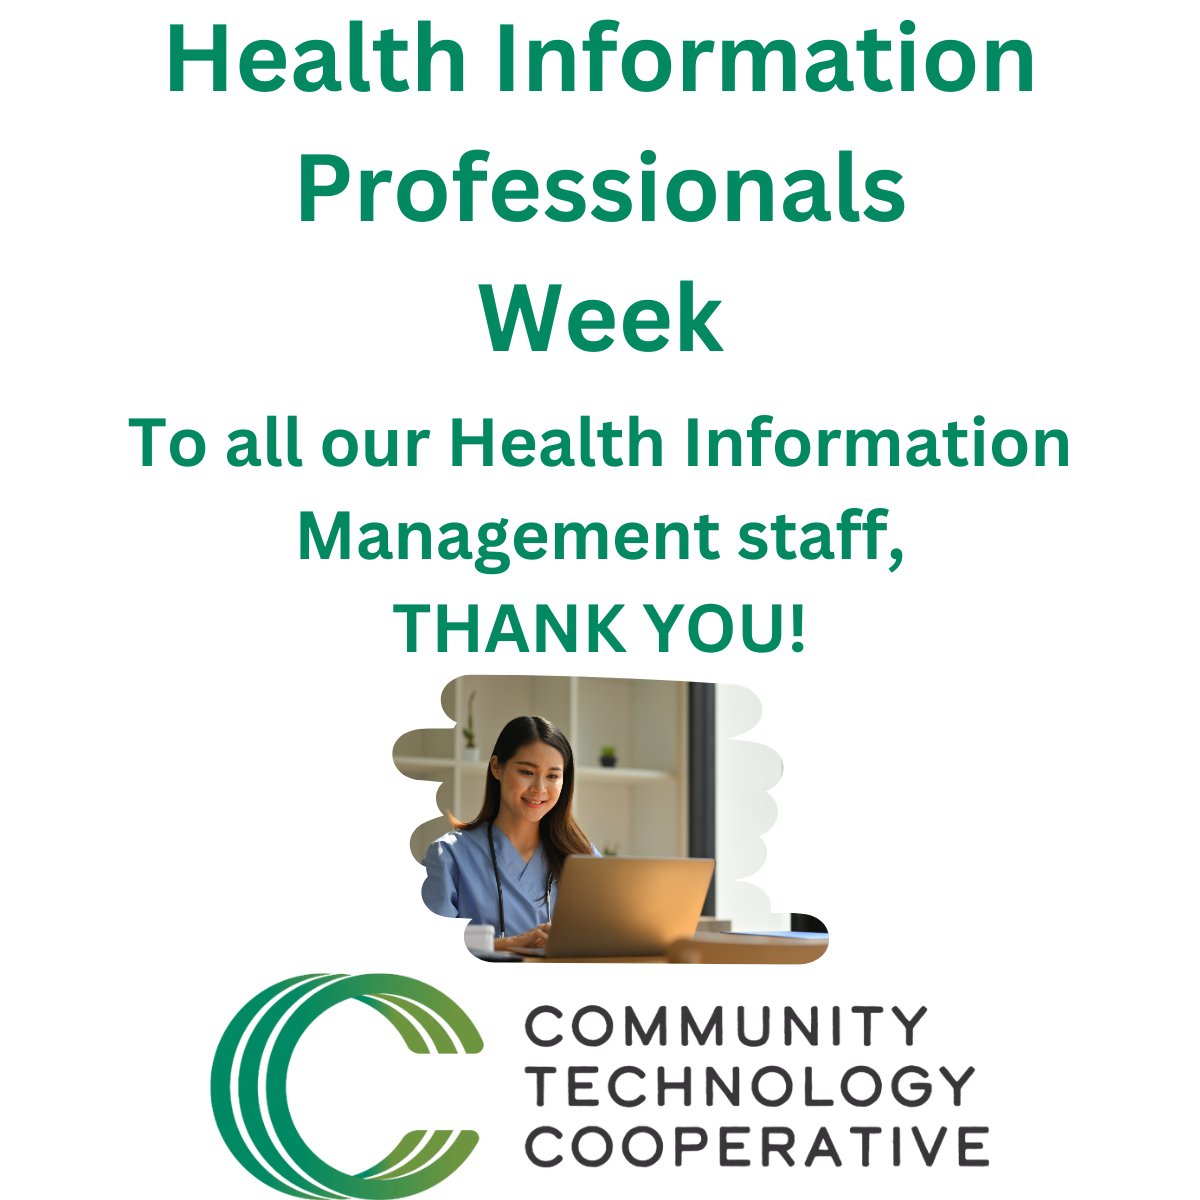 Without your knowledge and abilities, the healthcare ecosystem would not be the same .

From all of us at Community Care Cooperative (C3) and Community Technology Cooperative (CTC), we see you.

#HIPWEEK24 #HealthInformation #MedicalRecords #EHR #epic